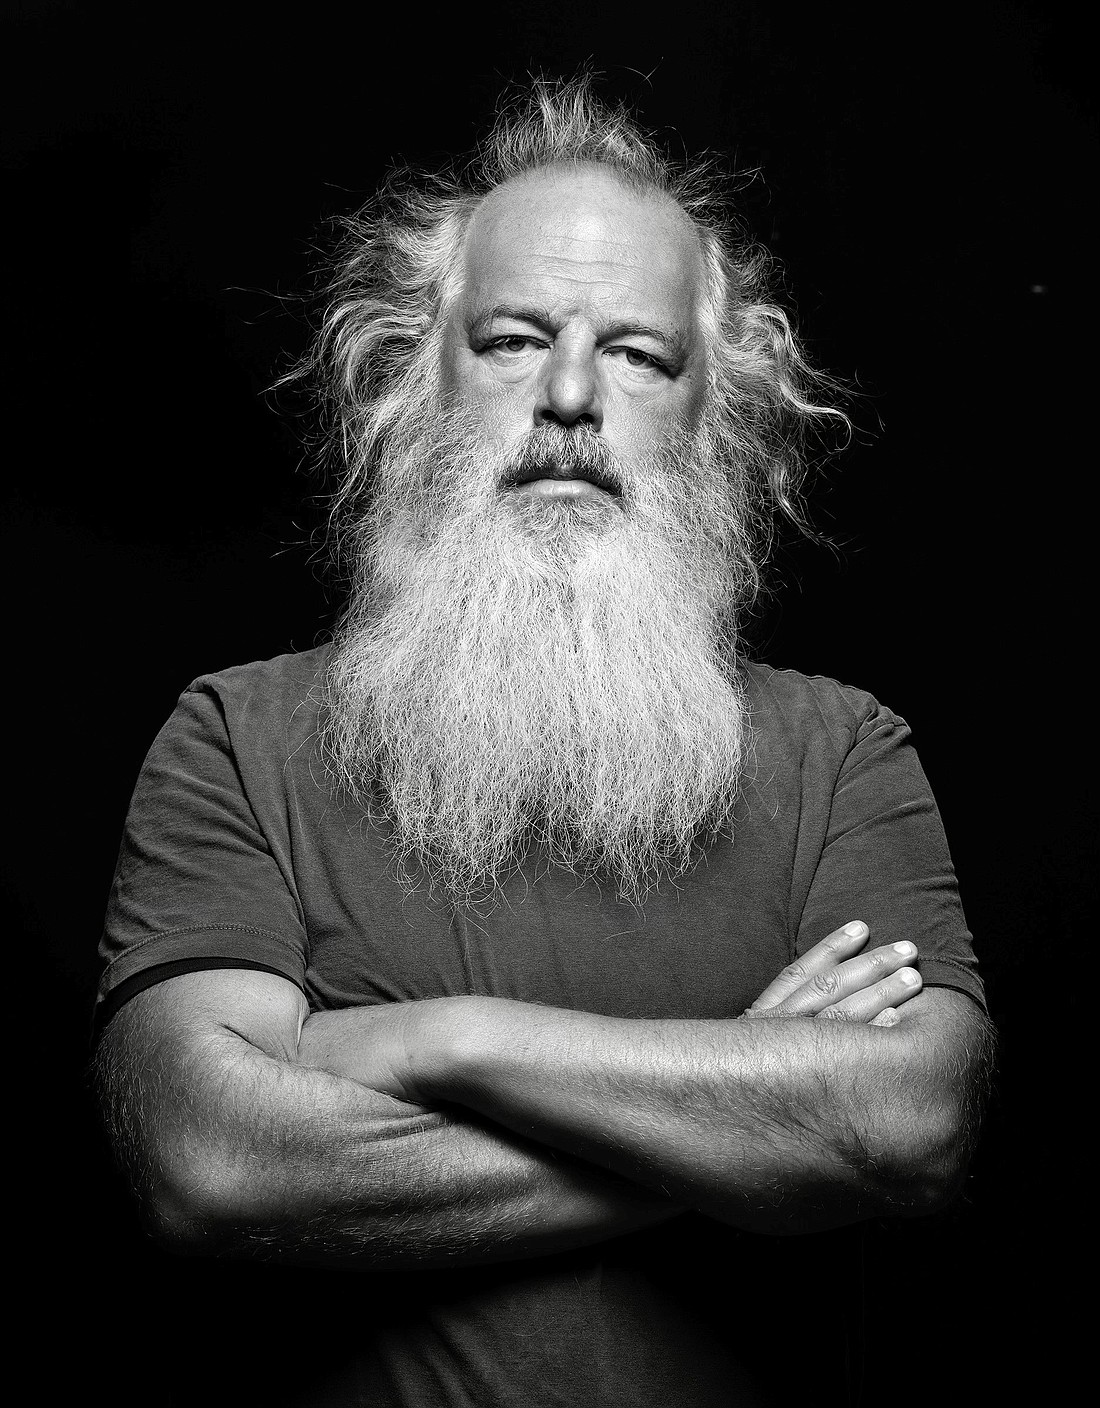 Legendary music producer and founder of Def Jam Recordings Rick Rubin is known for his light touch with artists and an ear for what’s profitable. His first book, “The Creative Act: A Way of Being” is a poetic primer for unlocking your creative potential.